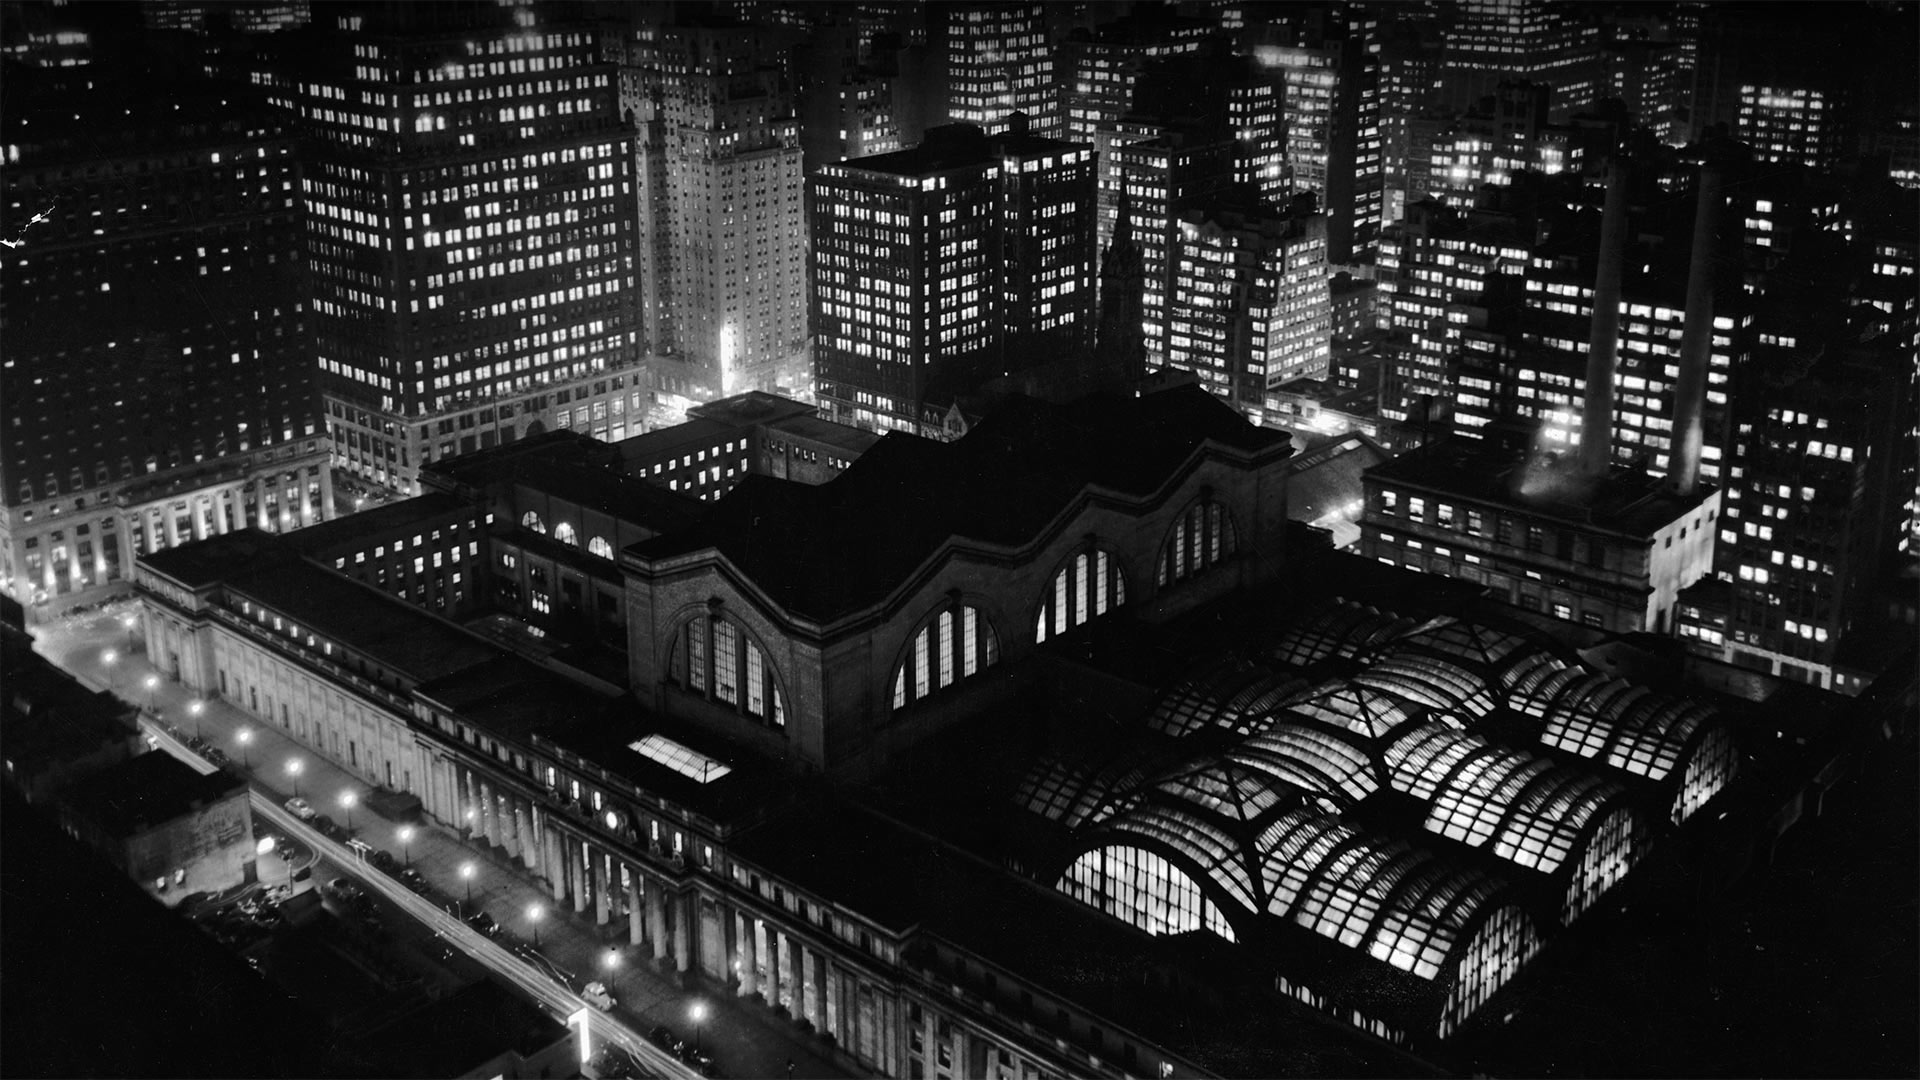 Aerial view of Penn Station and the New York City skyline at night in the 1950s - R. Gates -Staff/Getty Images)